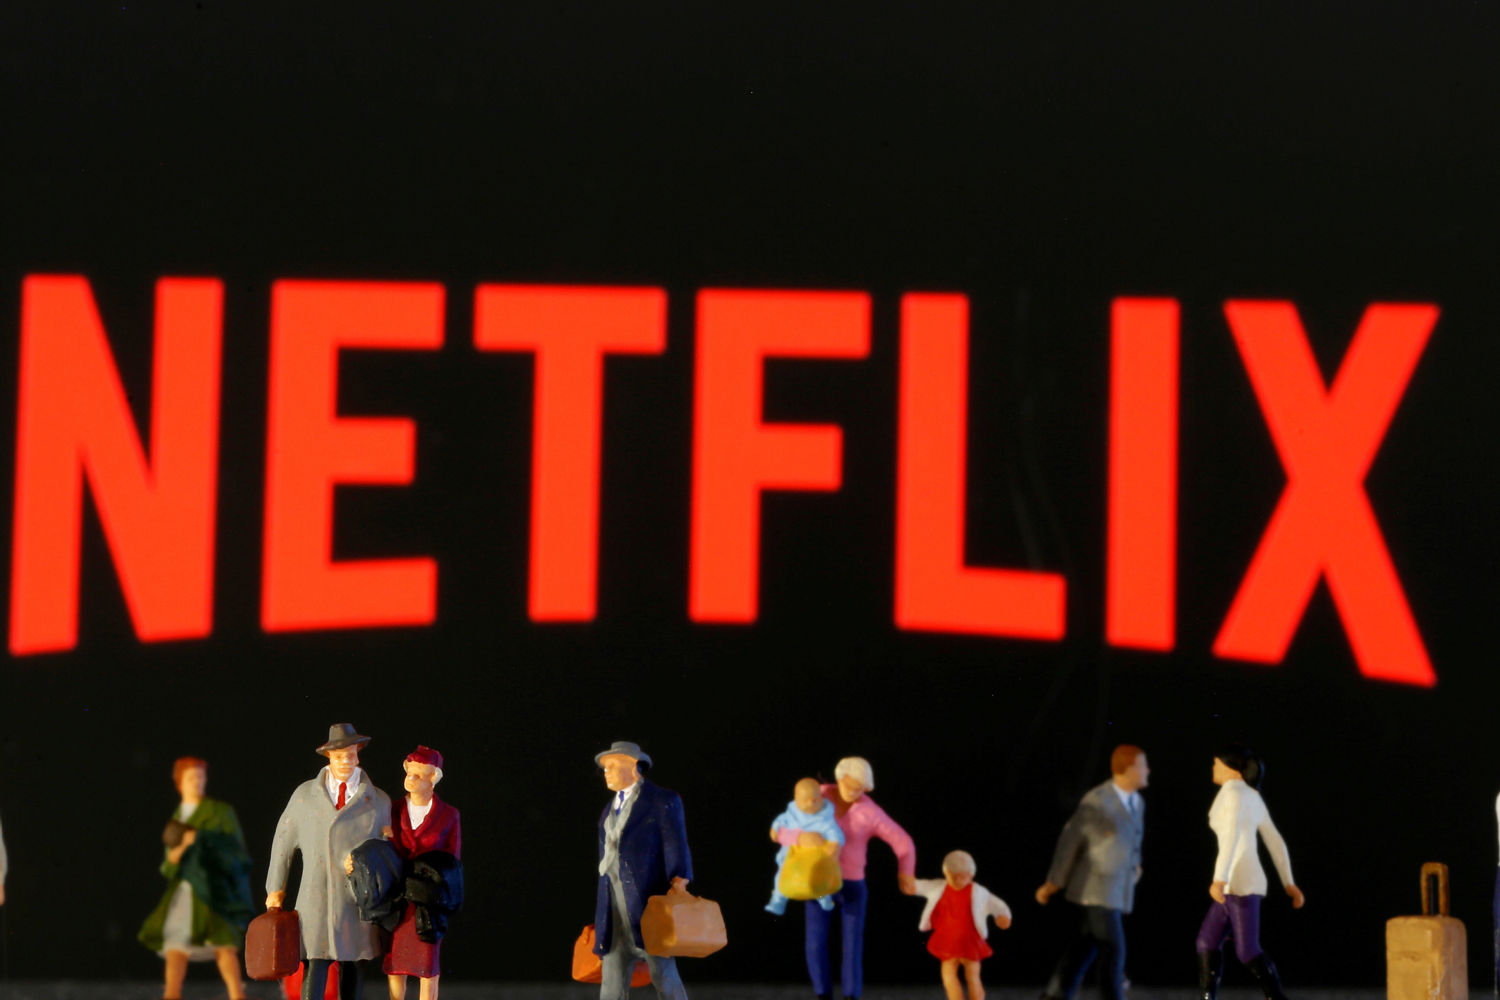 Streaming service Netflix moves to stop password sharing